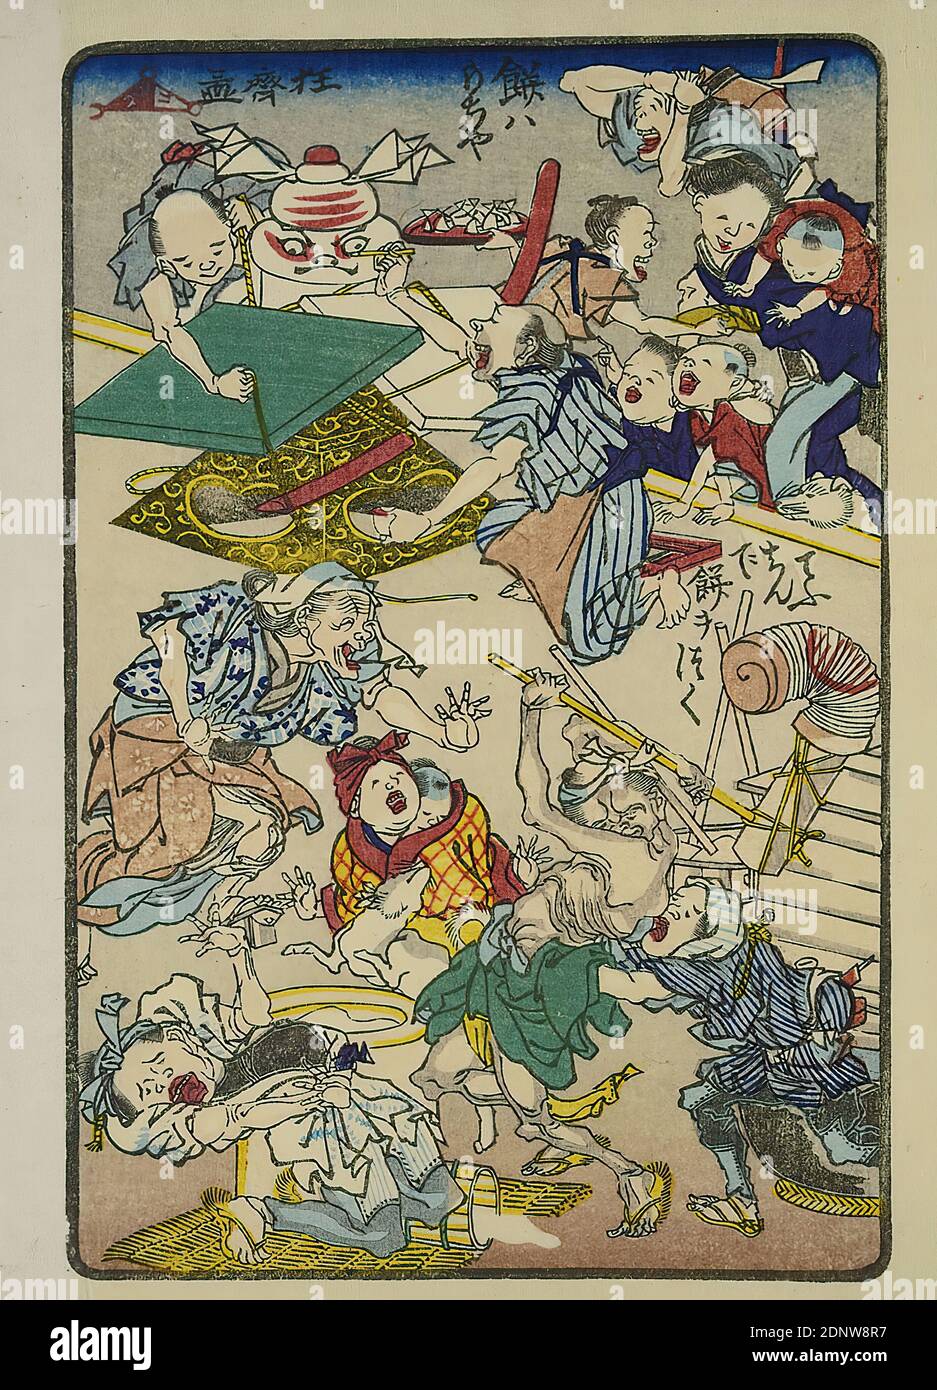 Kawanabe Kyōsai, Proverb: Smash Mochi with a lantern, from the series: One hundred pictures from Kyōsai, color woodcut, Total: Height: 19.00 cm; Width: 13.50 cm, signed: Kyōsai to 狂斎図, prints, printed matter, proverbs, children, dog, lantern, cake, tart, cake pastry, Edo period Stock Photo